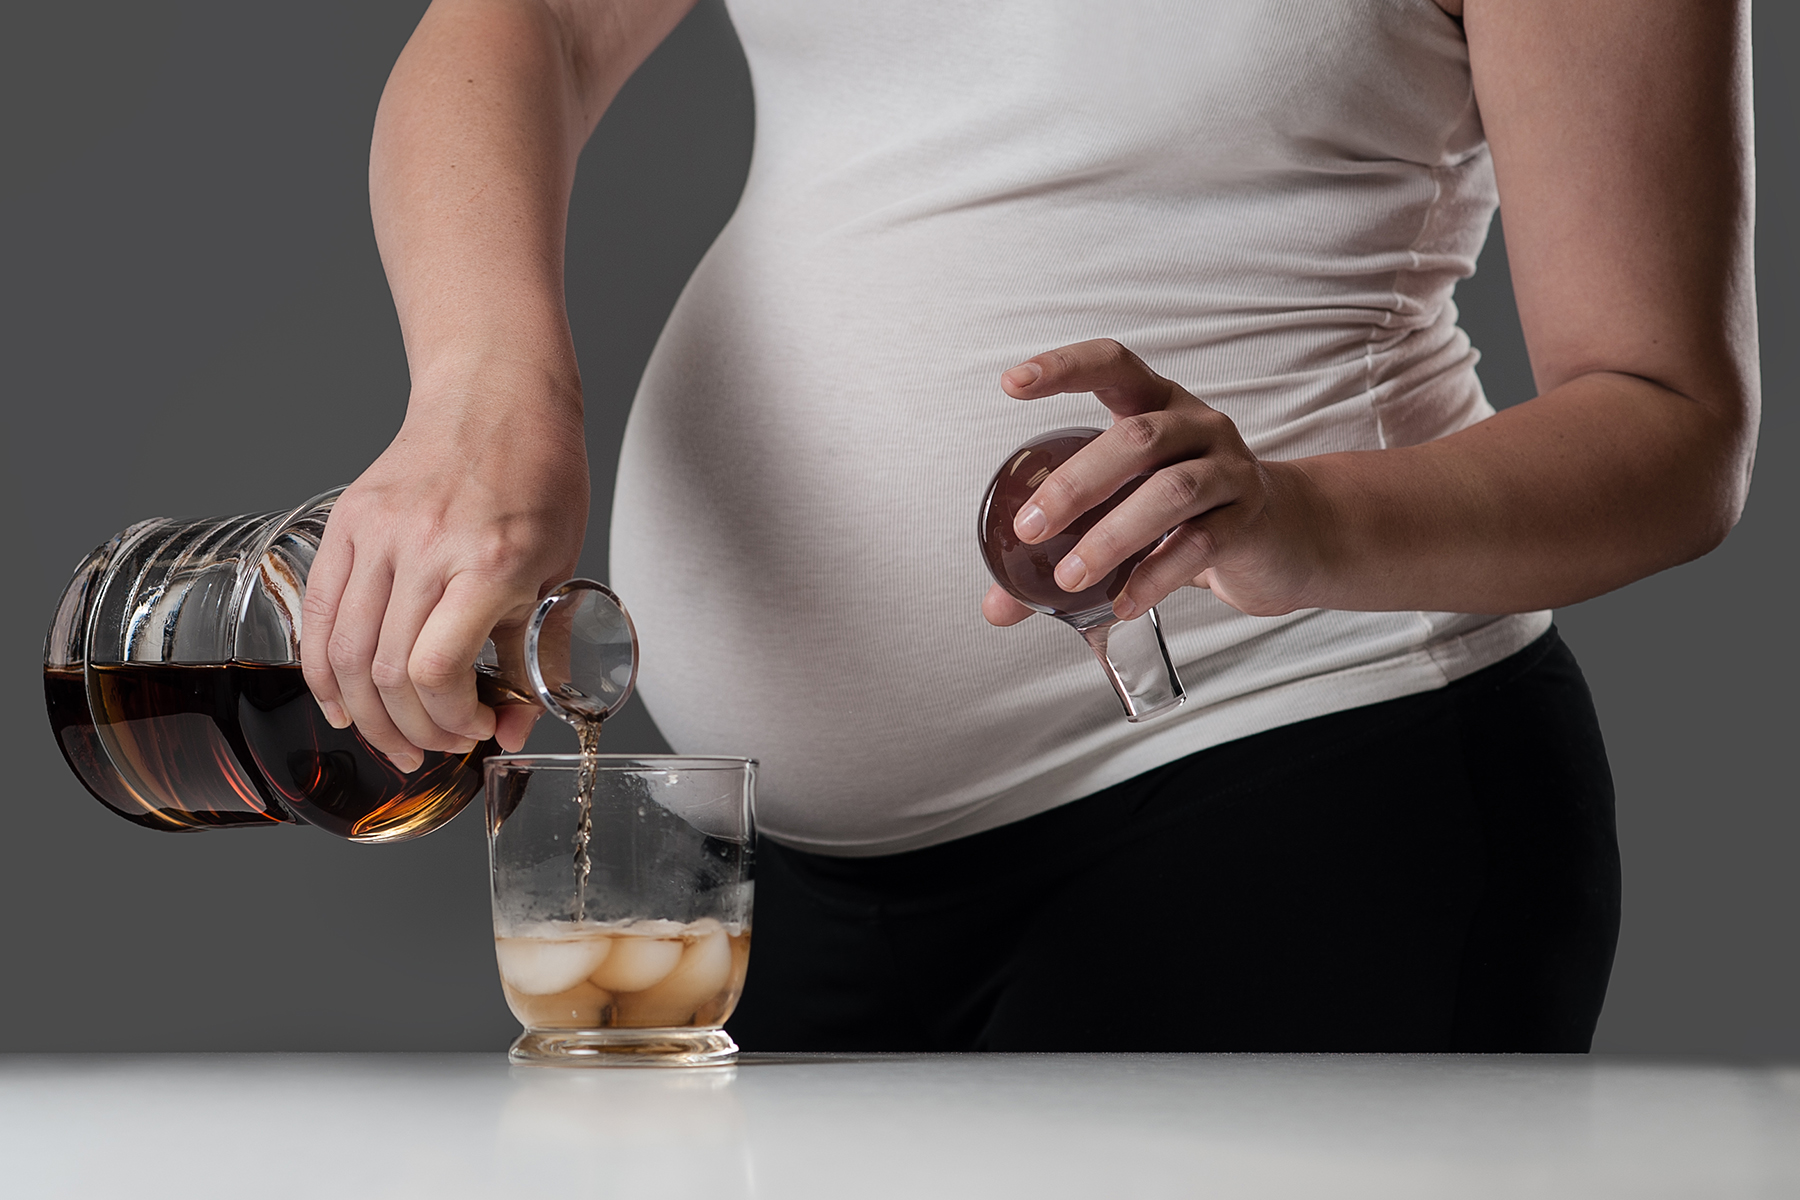 Pregnant woman with alcoholic drink.